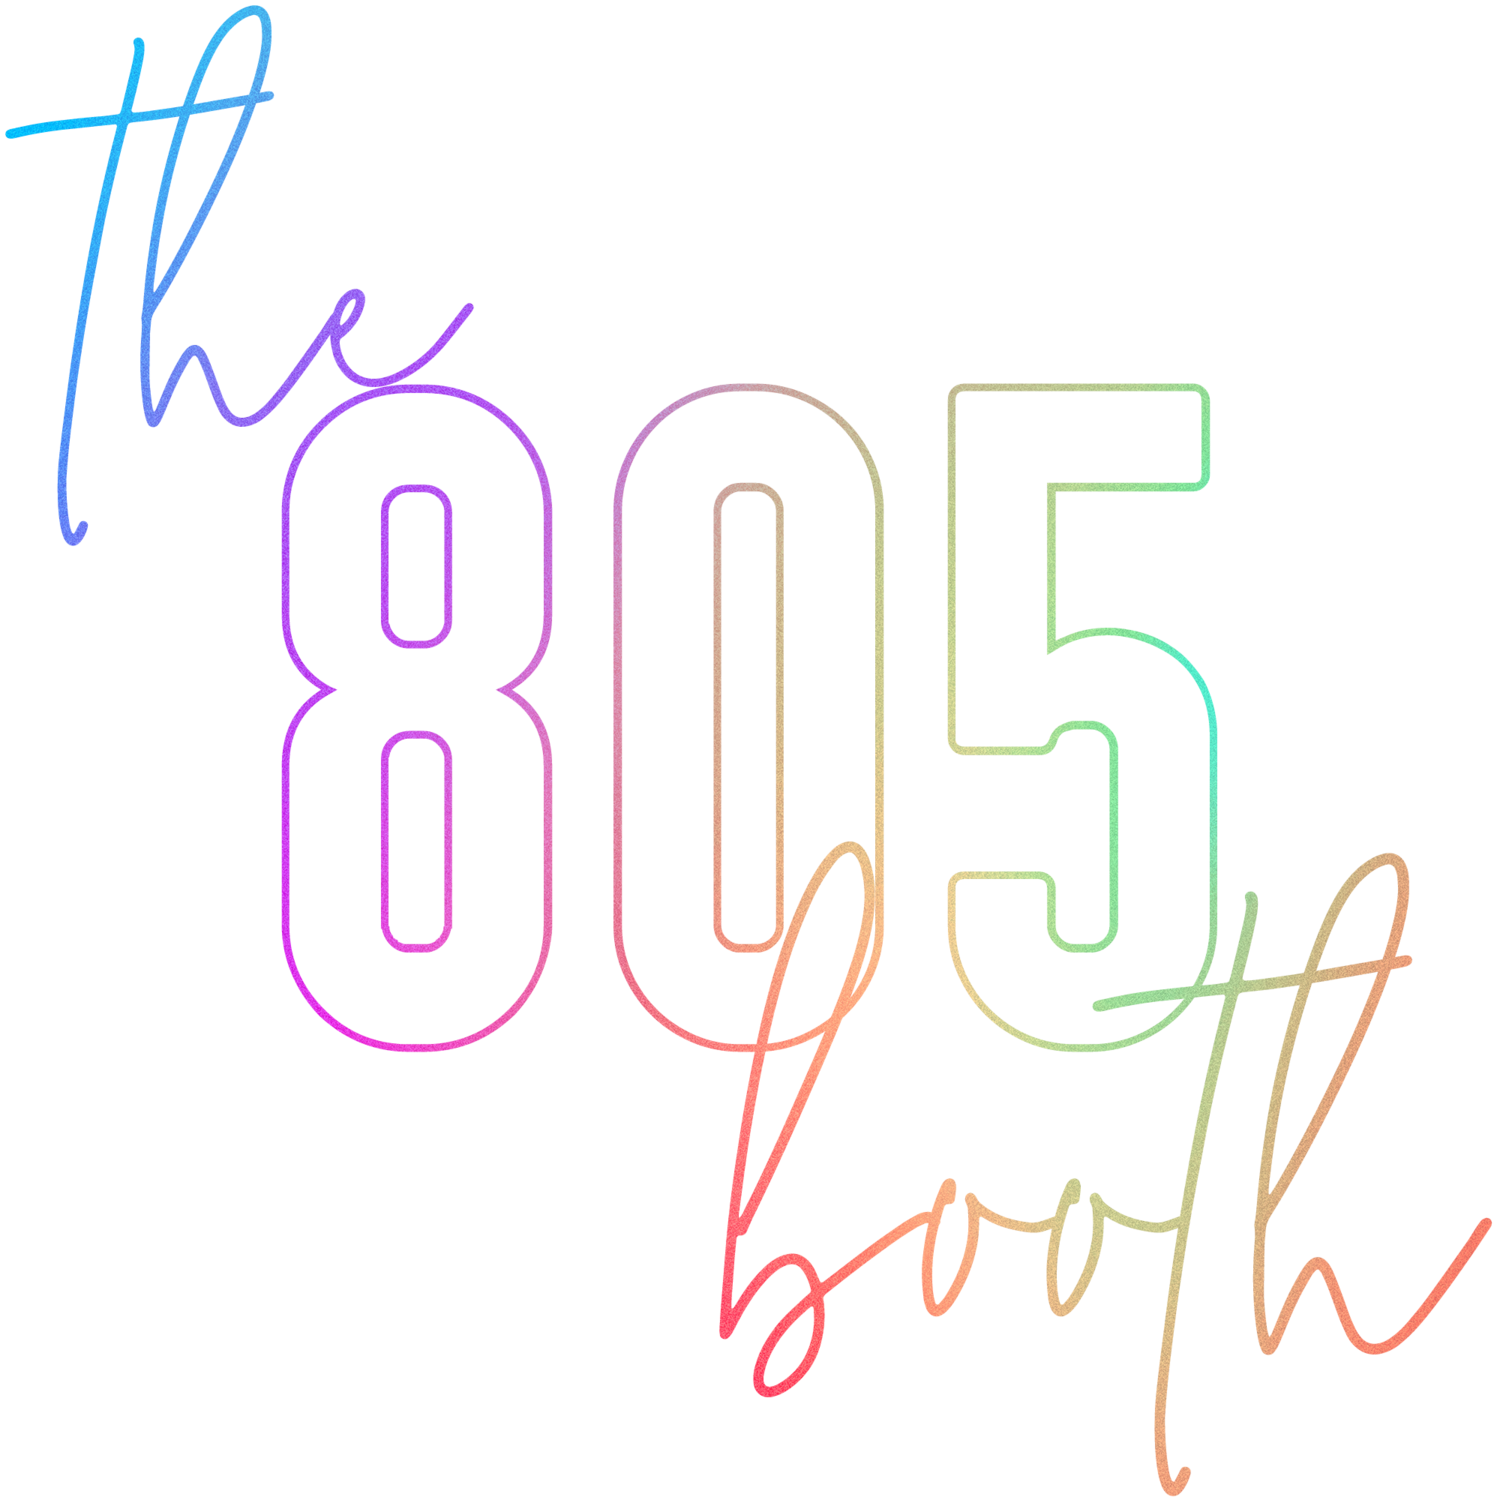 The 805 Booth